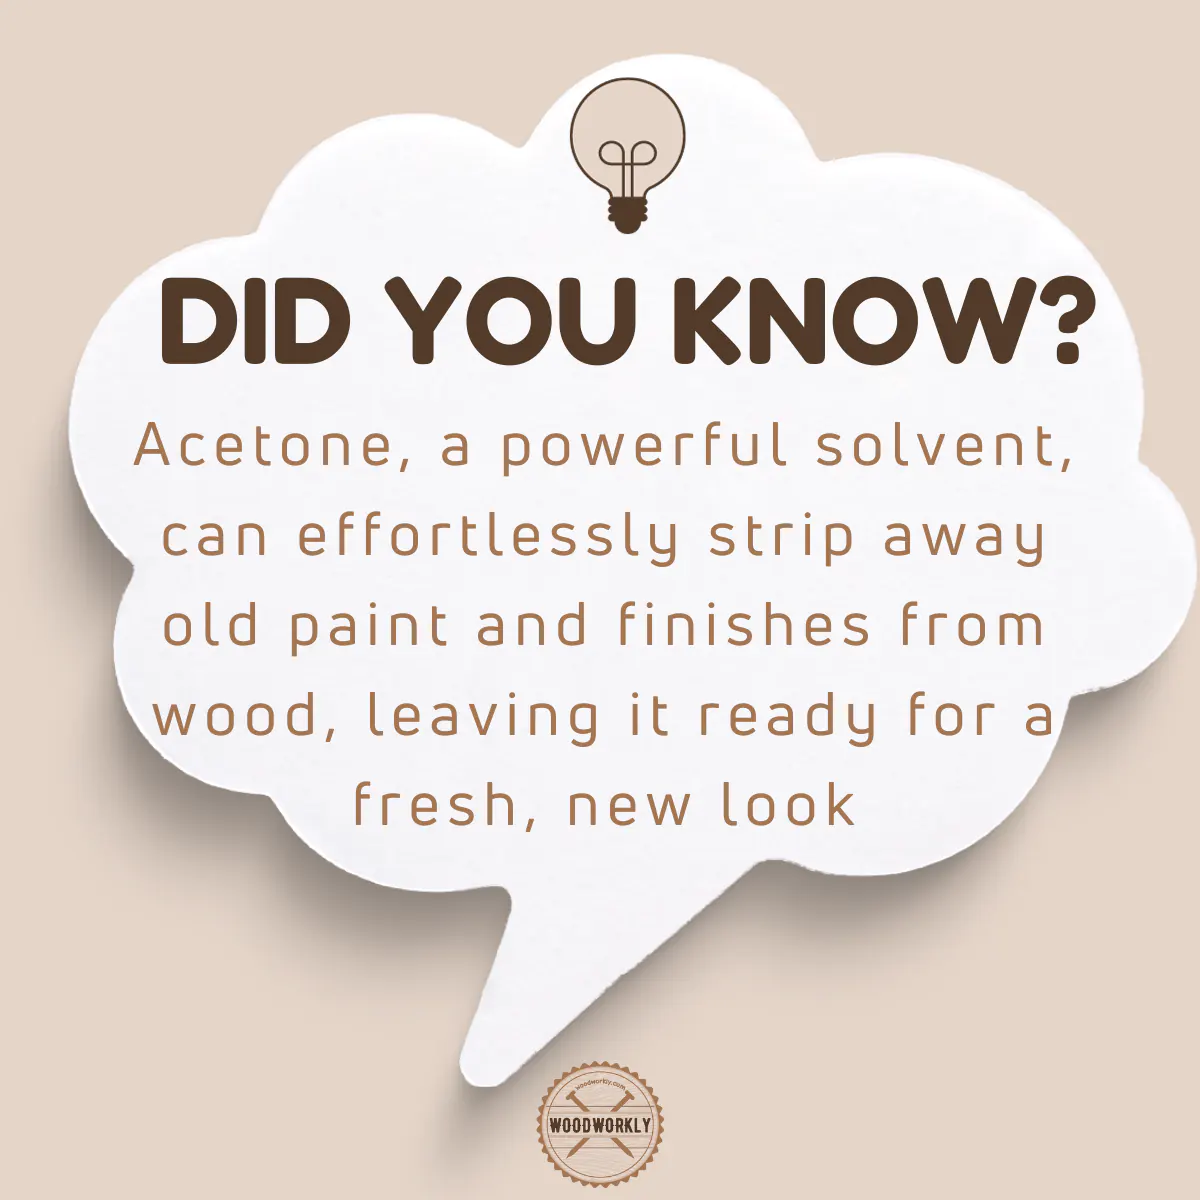 Did you know fact about acetone on wood